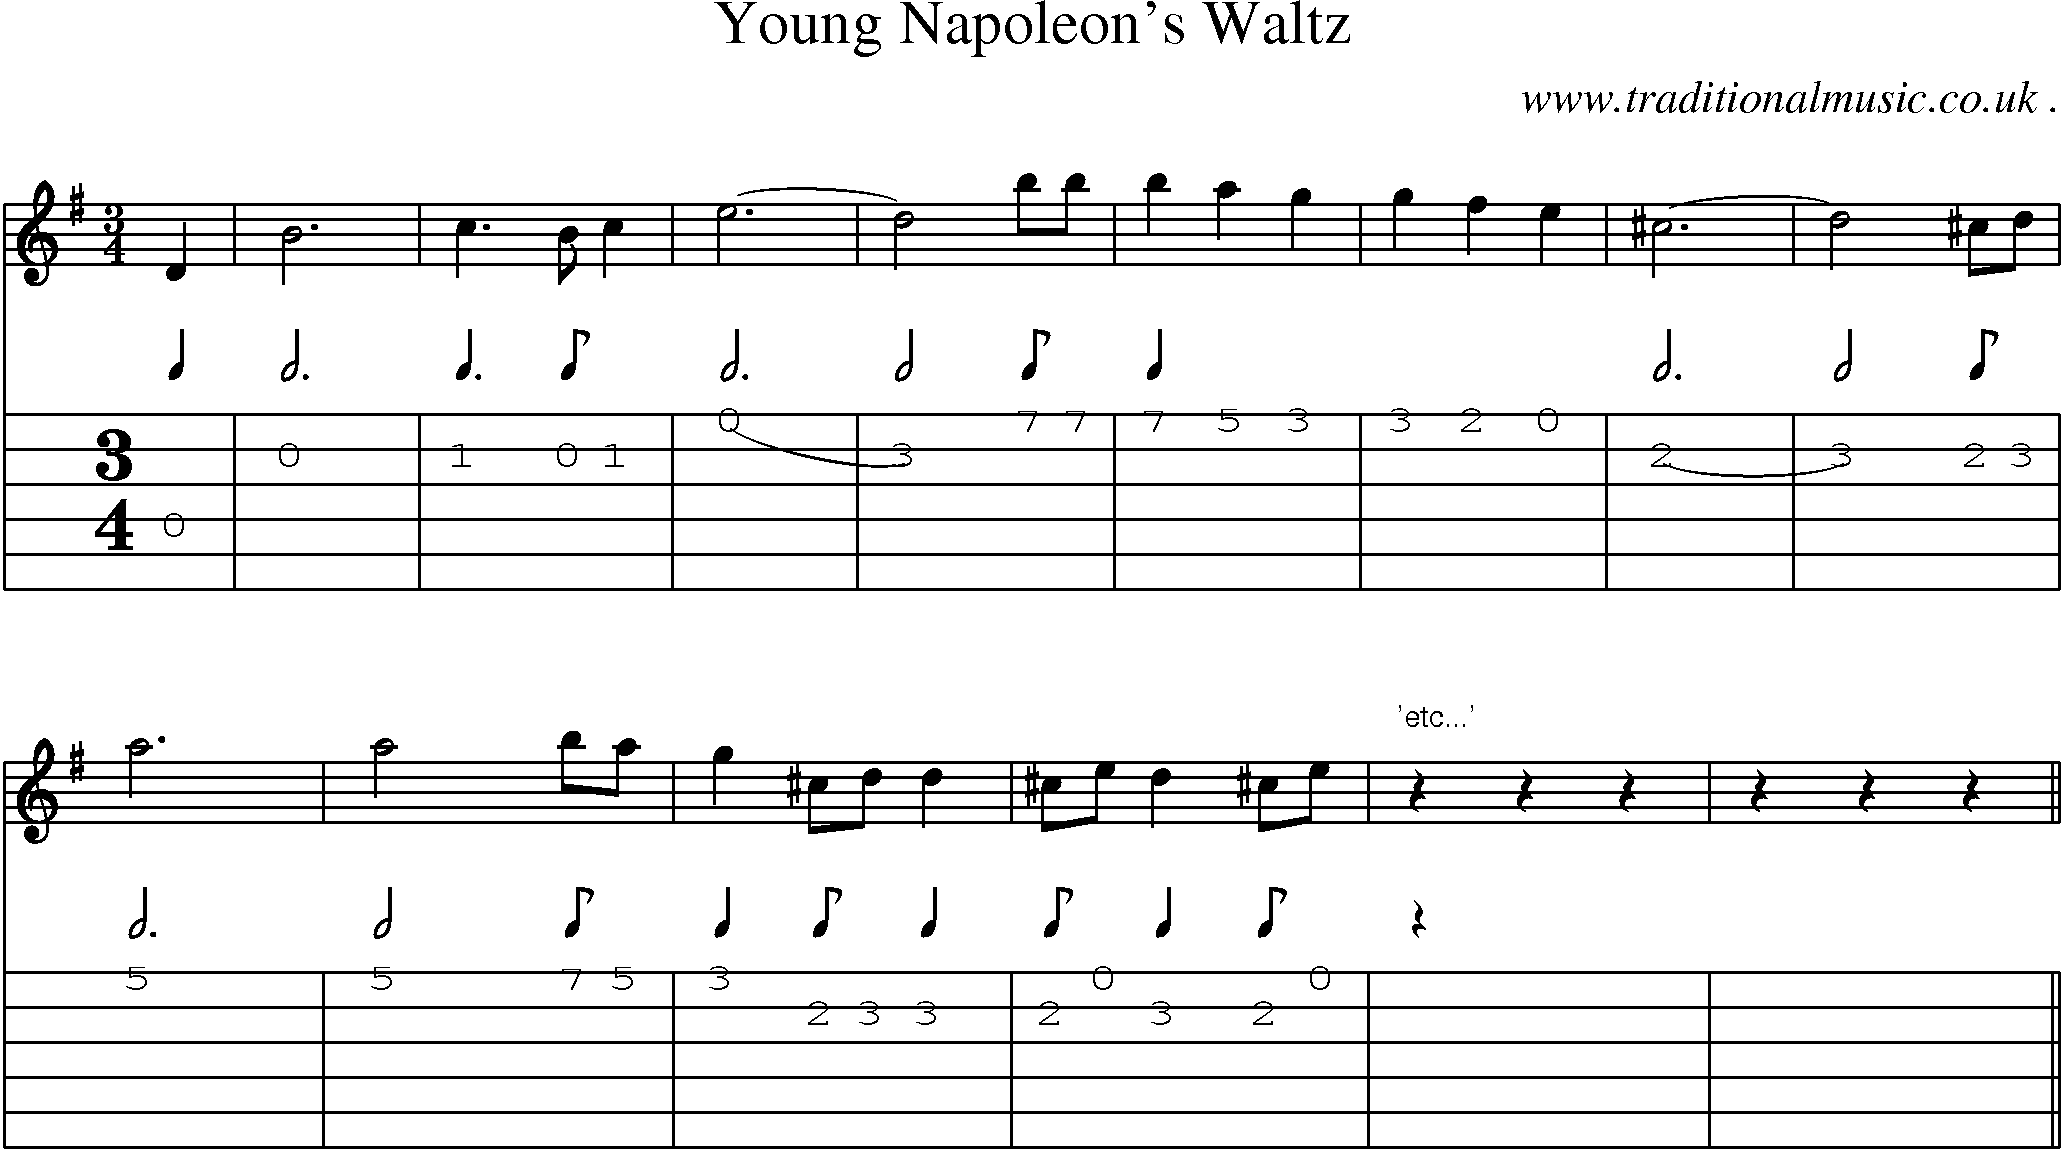 Sheet-Music and Guitar Tabs for Young Napoleons Waltz